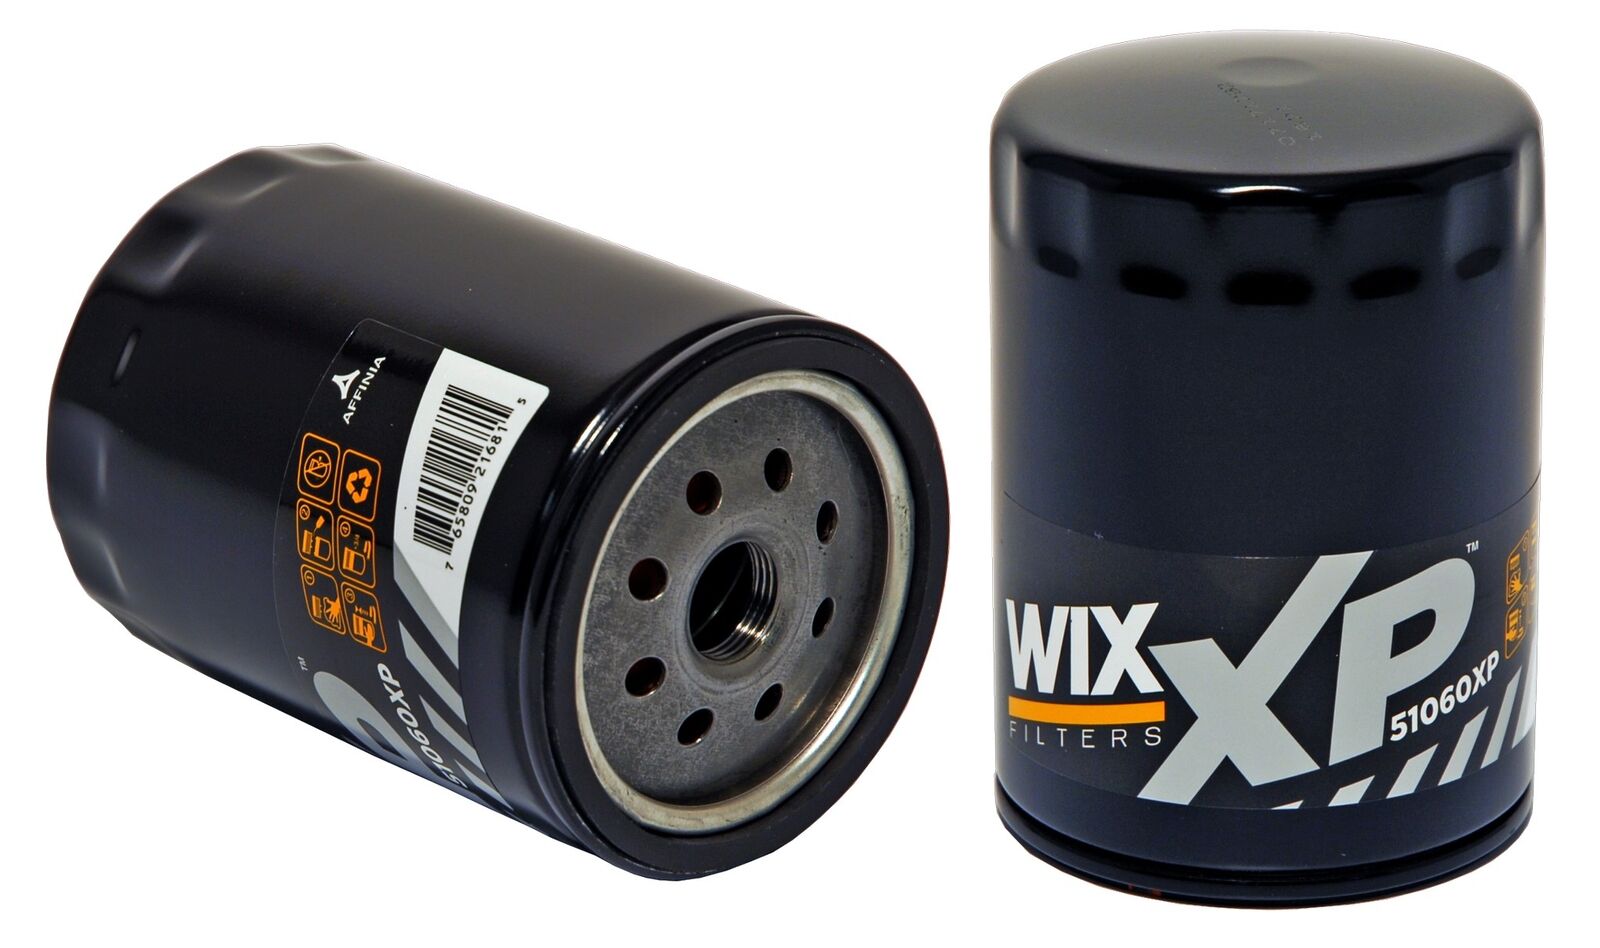 Wix XP Engine Motor Oil Filter (Spin-On) 51060XP for Cady Chevy Ford GMC Hummer